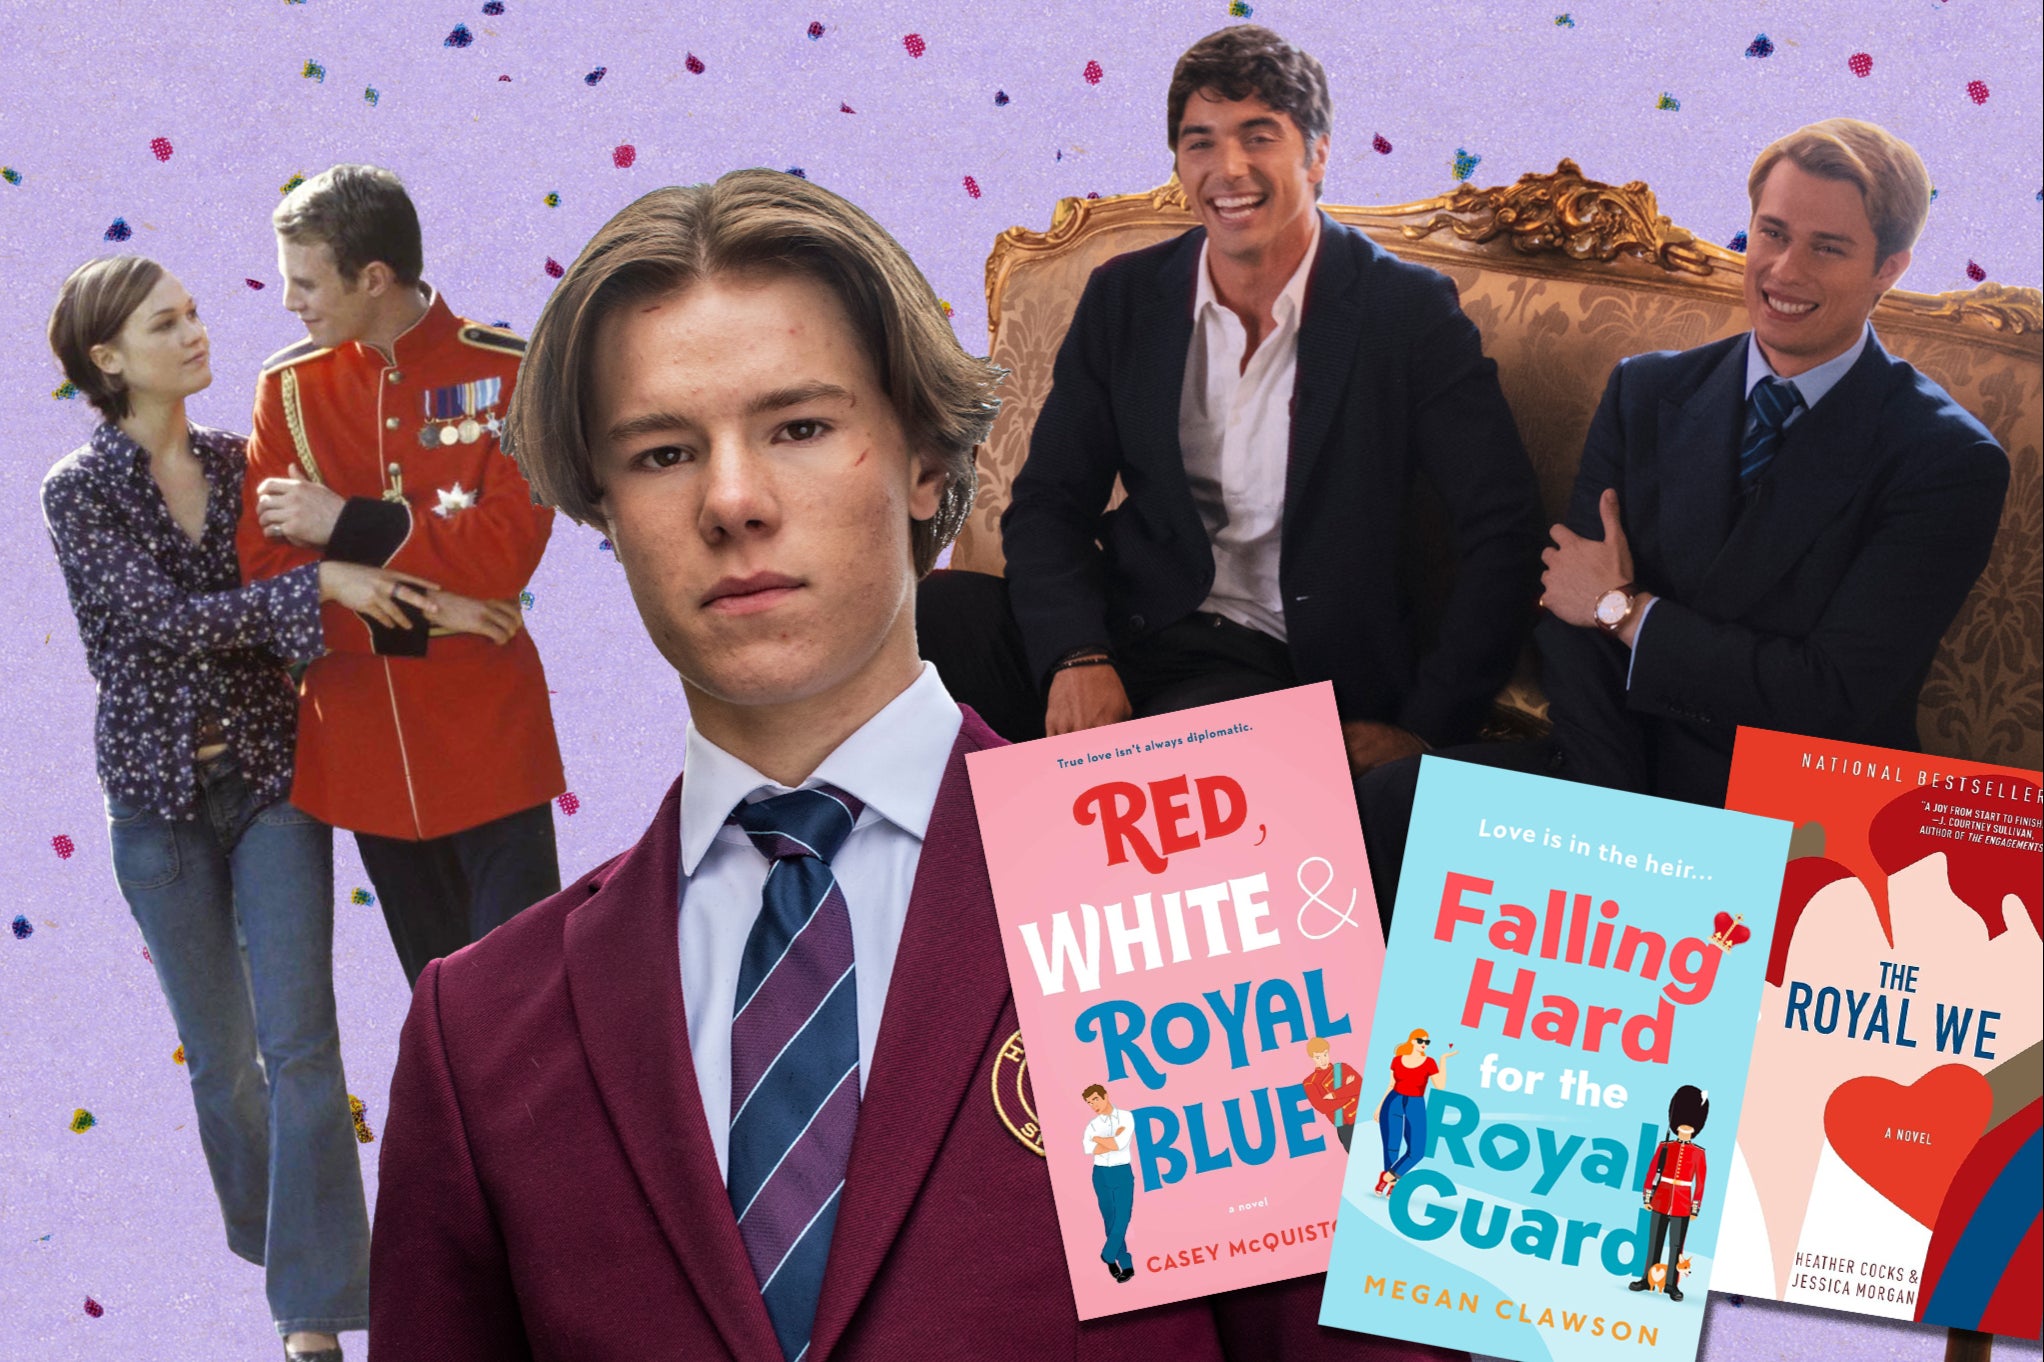 ‘The Prince & Me’, ‘Young Royals’, and ‘Red, White & Royal Blue’ are just some of the projects Gen Z readers and viewers are hooked on